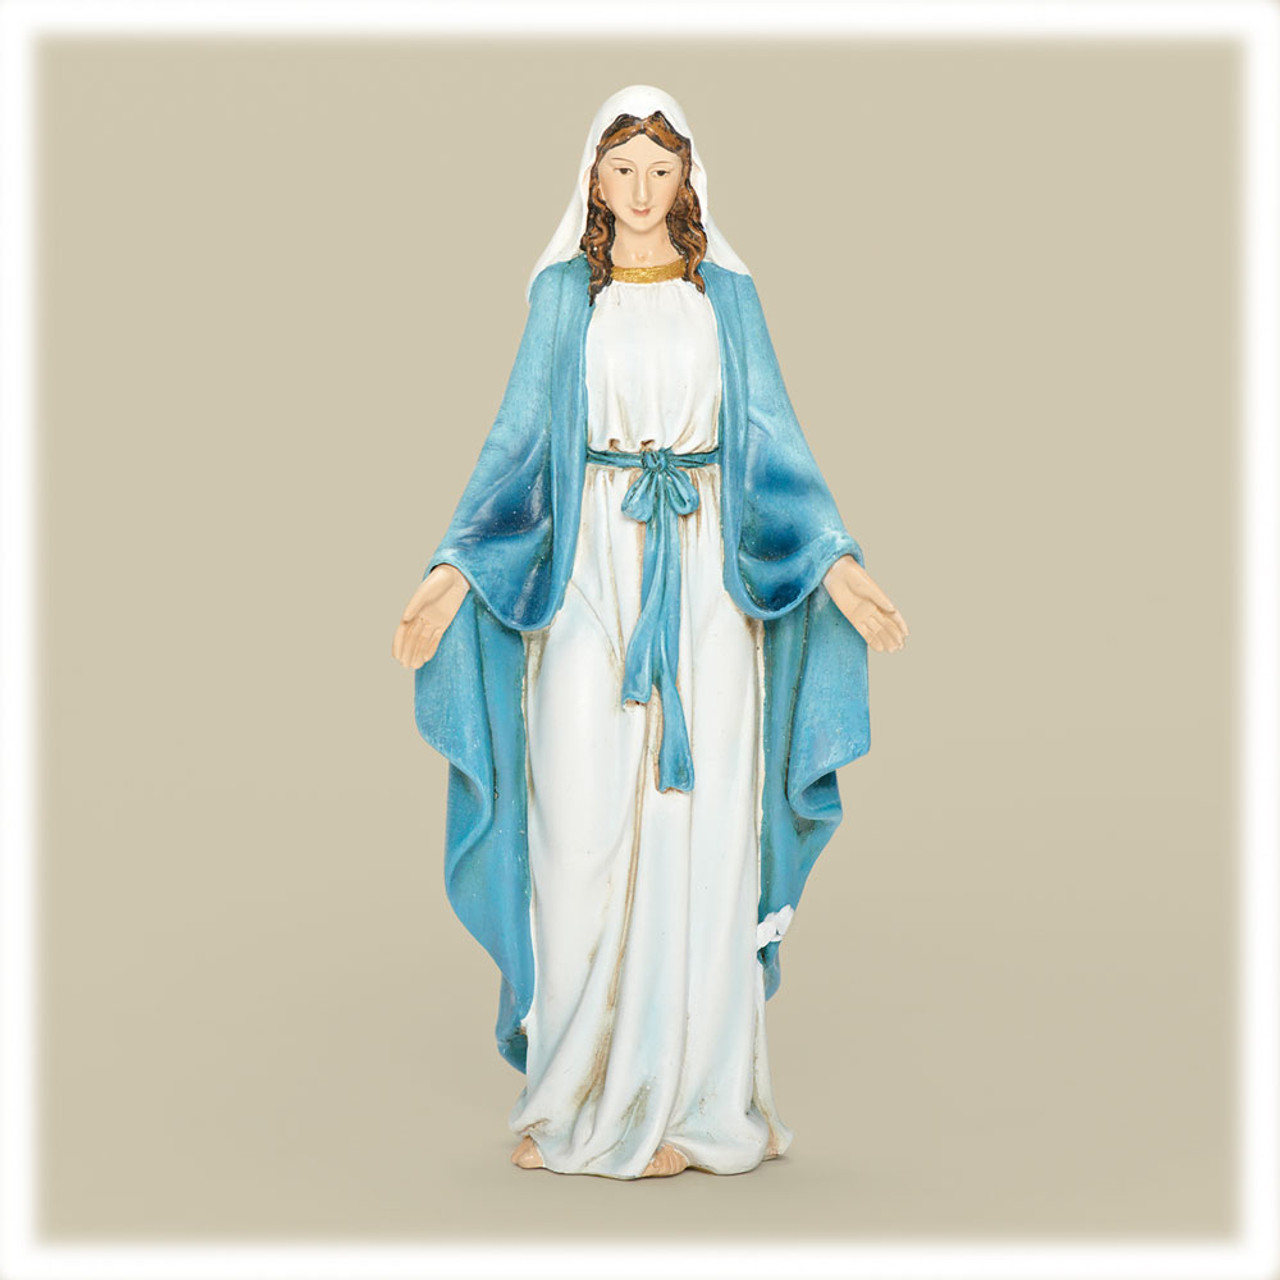 6" Our Lady of Grace Statue from Joseph Studio